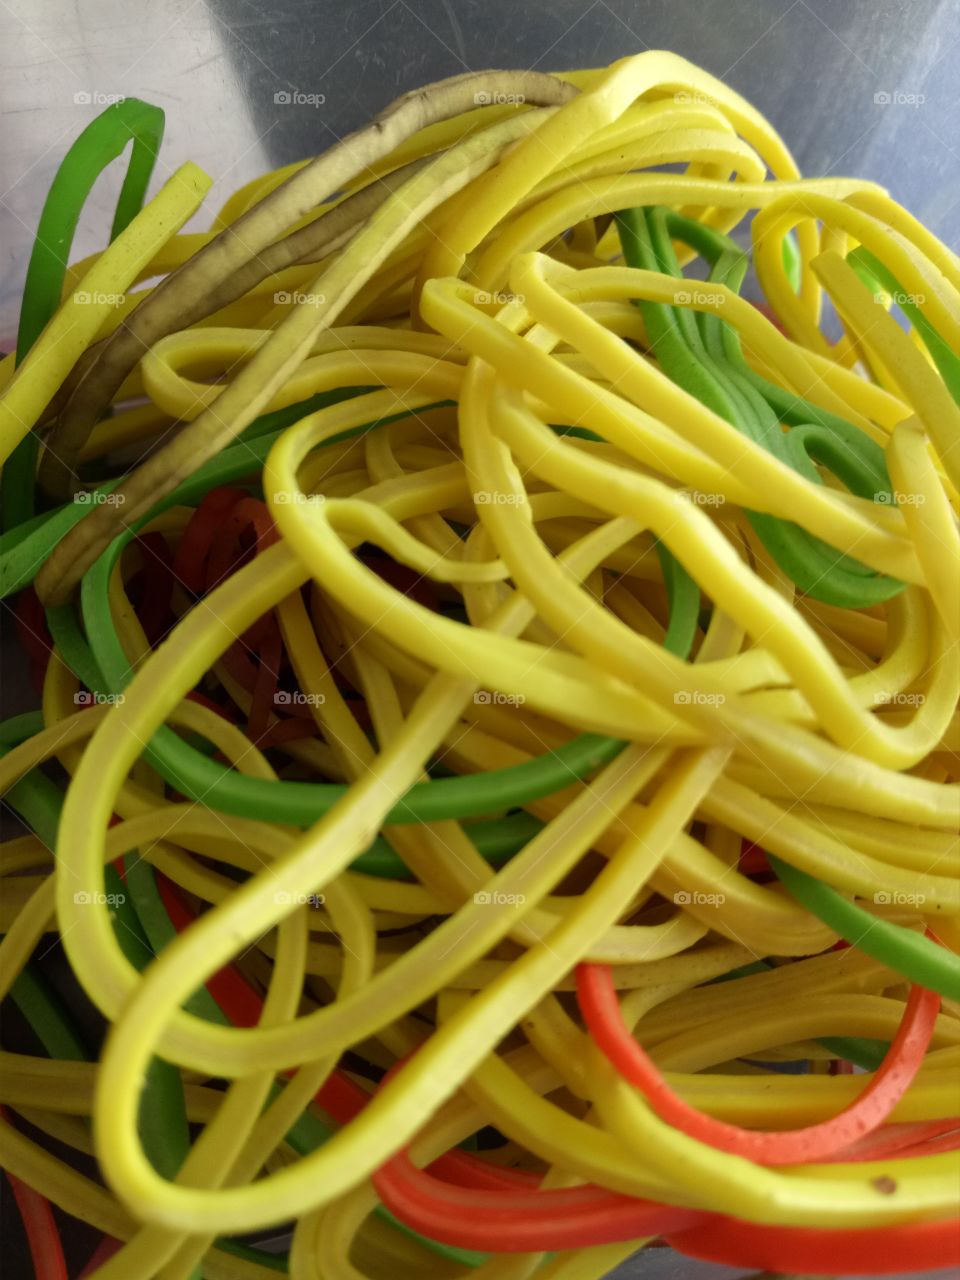 colorful rubber band